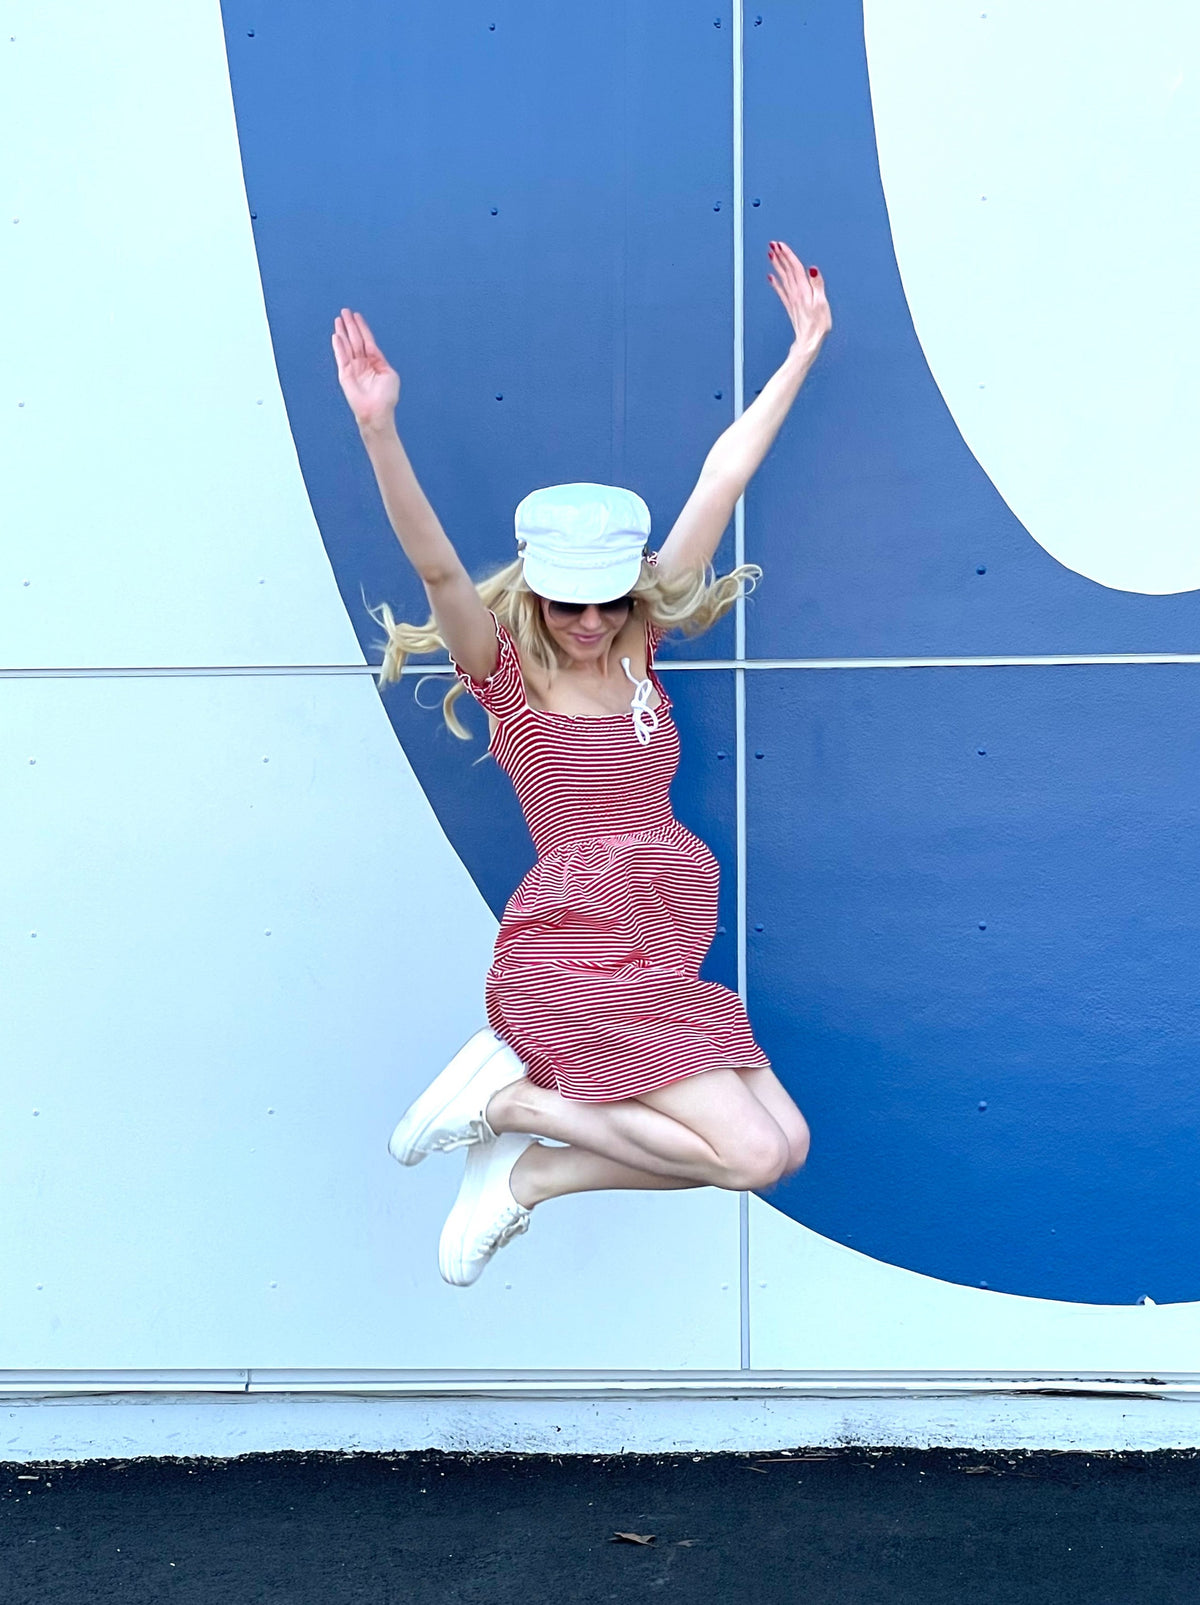 Model wearing red and white striped shirred dress and white hat jumping with both hands in the air.